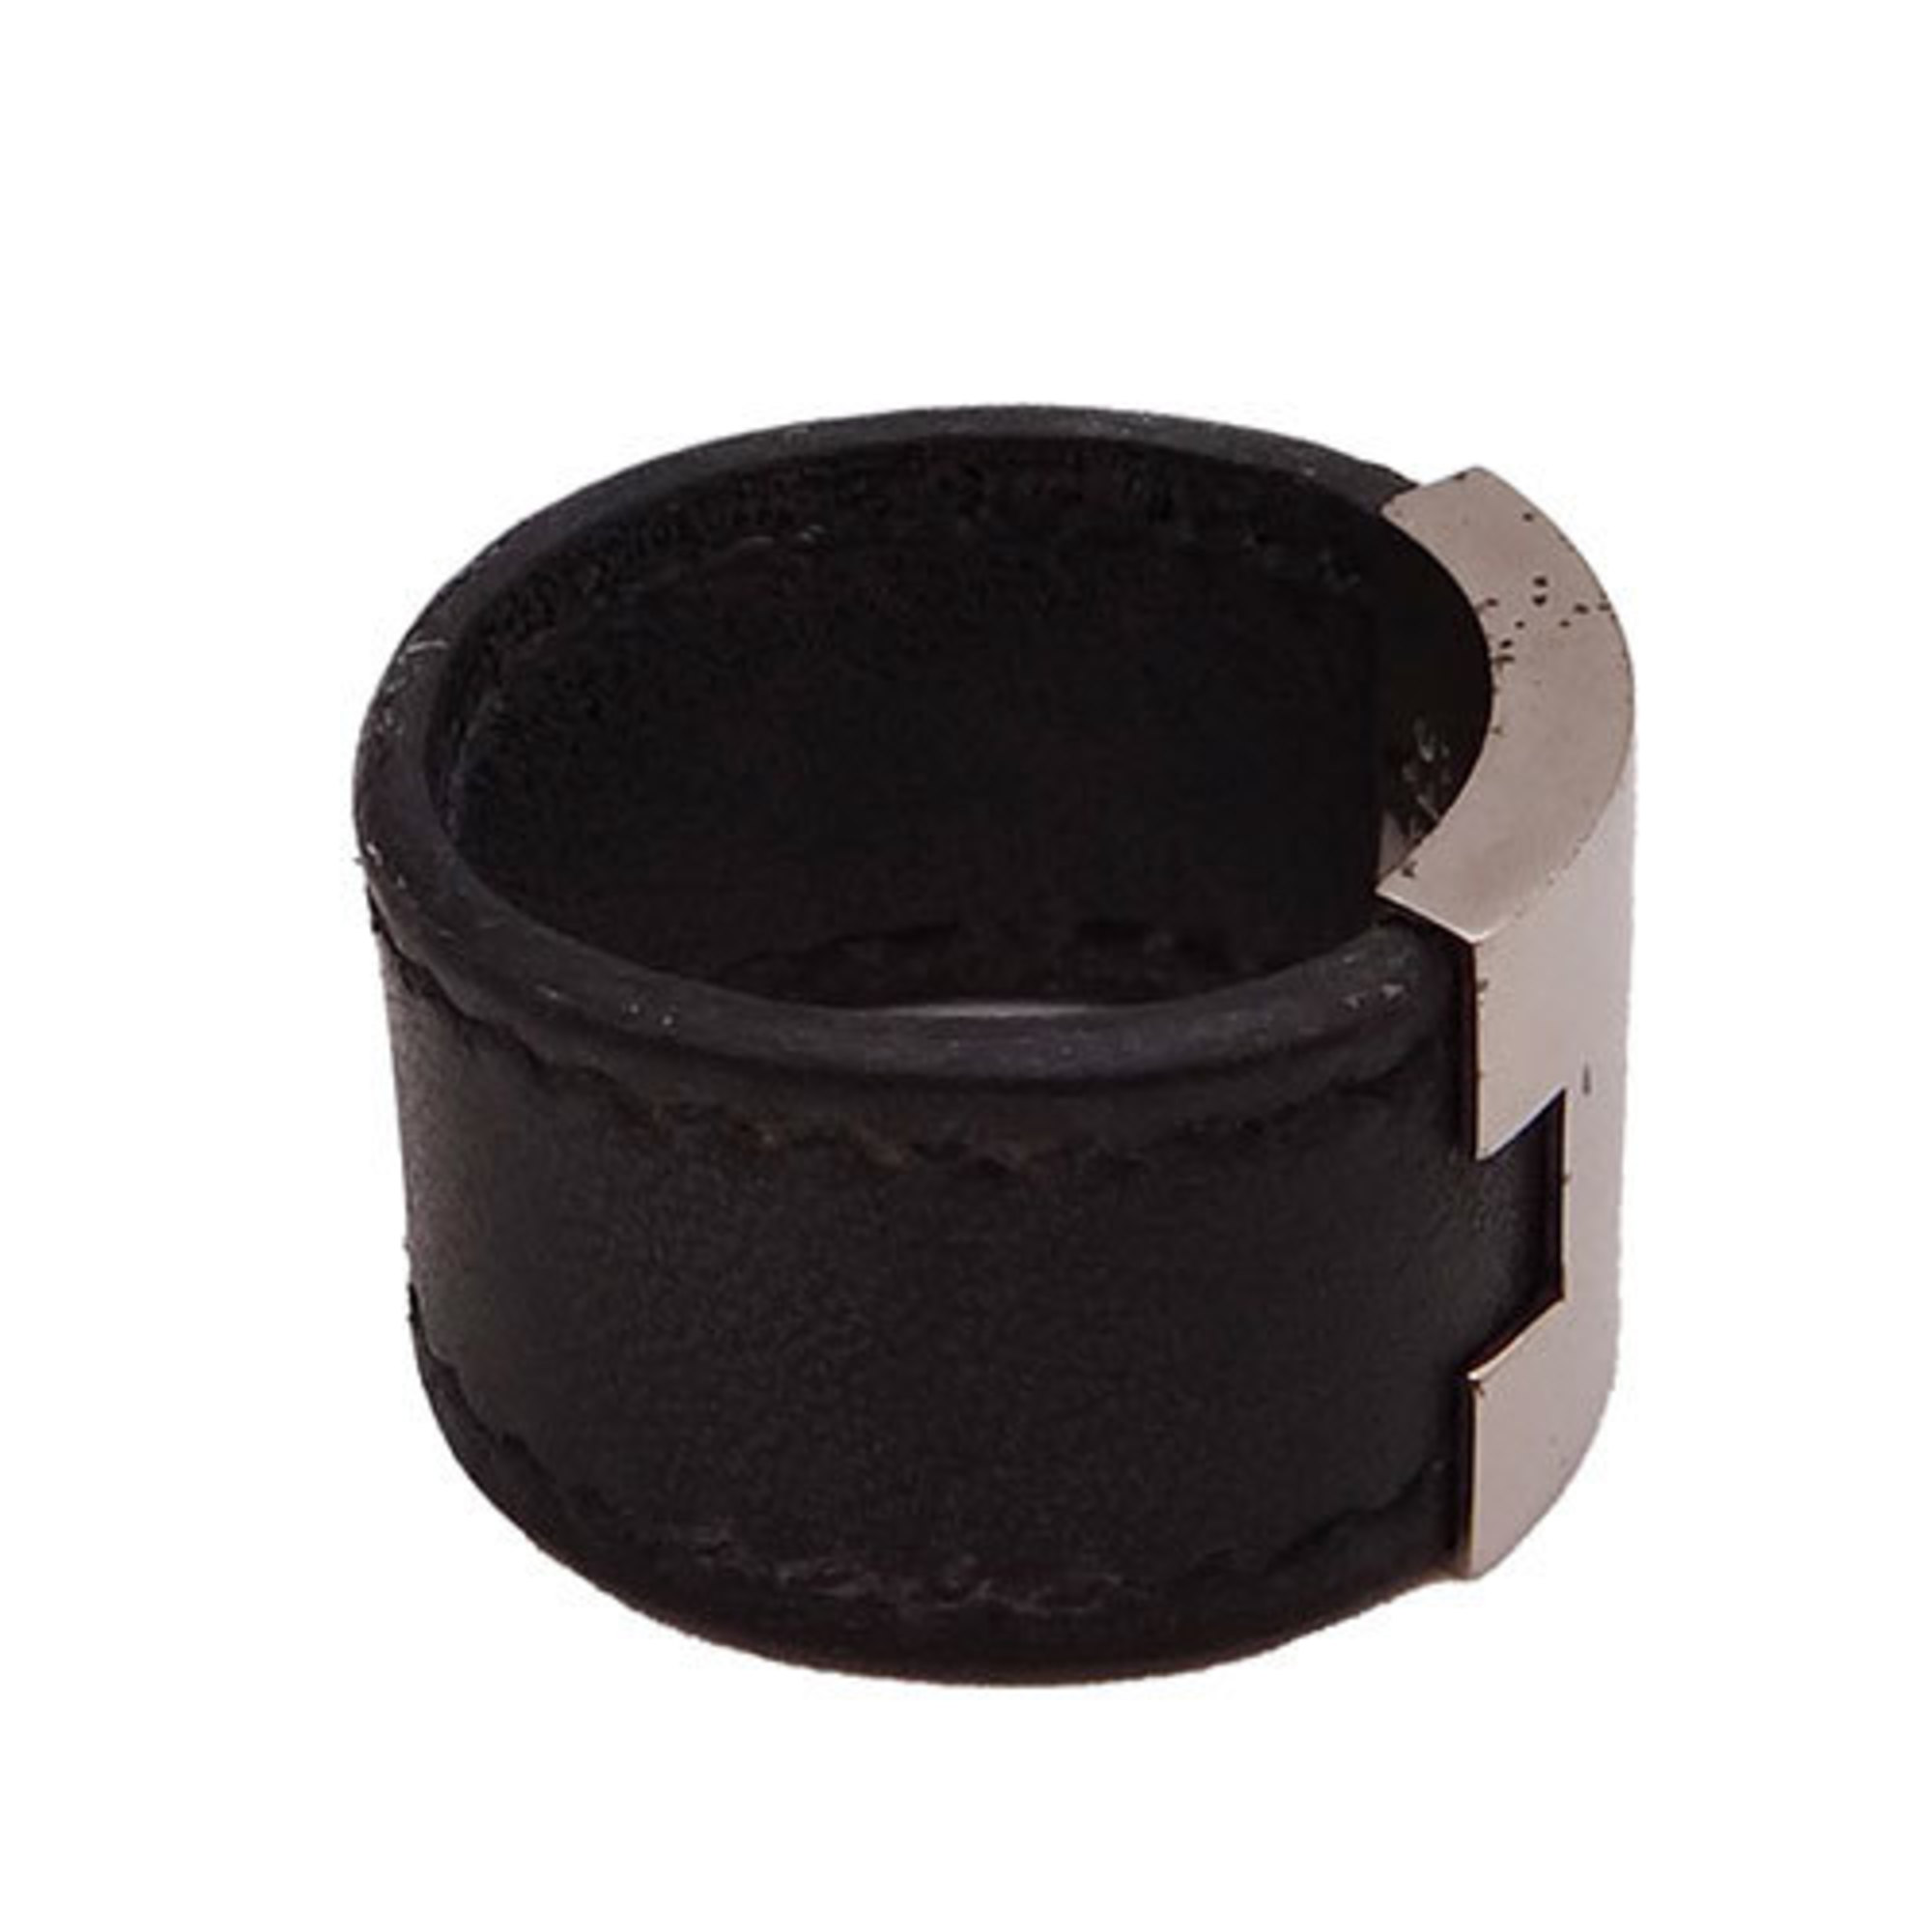 Hermes HERMES Ring Lurie L size Women's Men's Leather Black Approx. 20.5